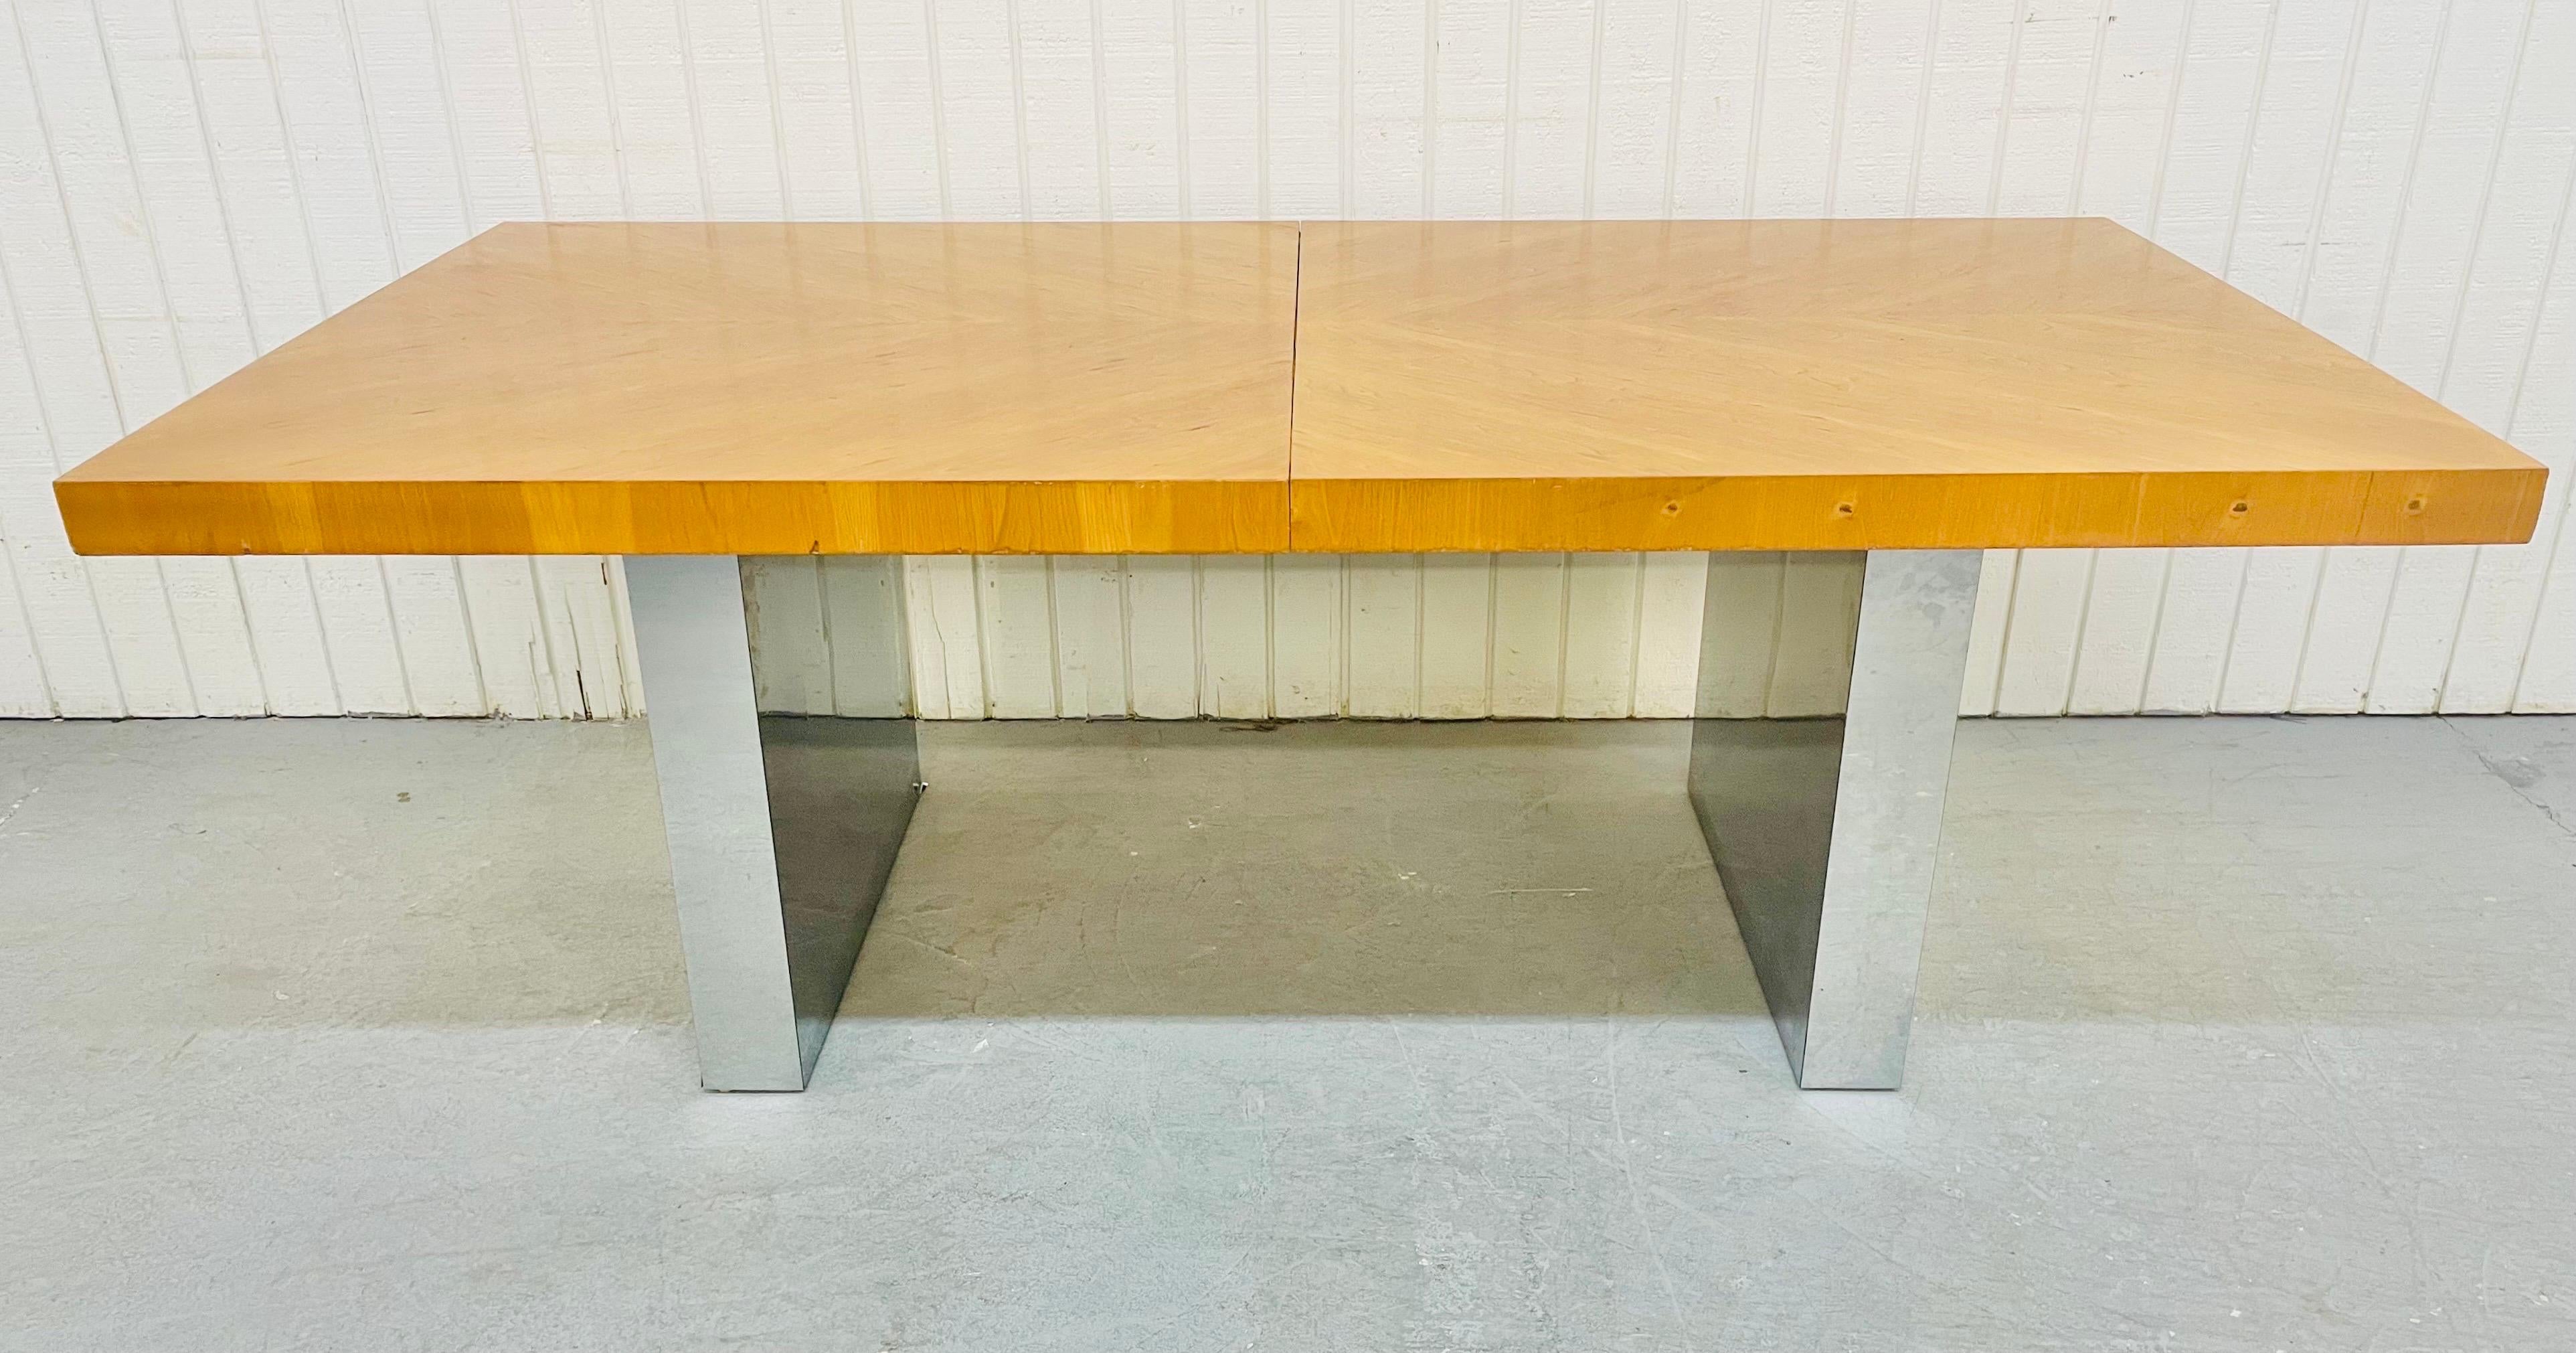 This listing is for a vintage Milo Baughman style oak and chrome dining table. Featuring an rectangular oak top, chrome base, and one leaf to extend the table up to 100.25” L.